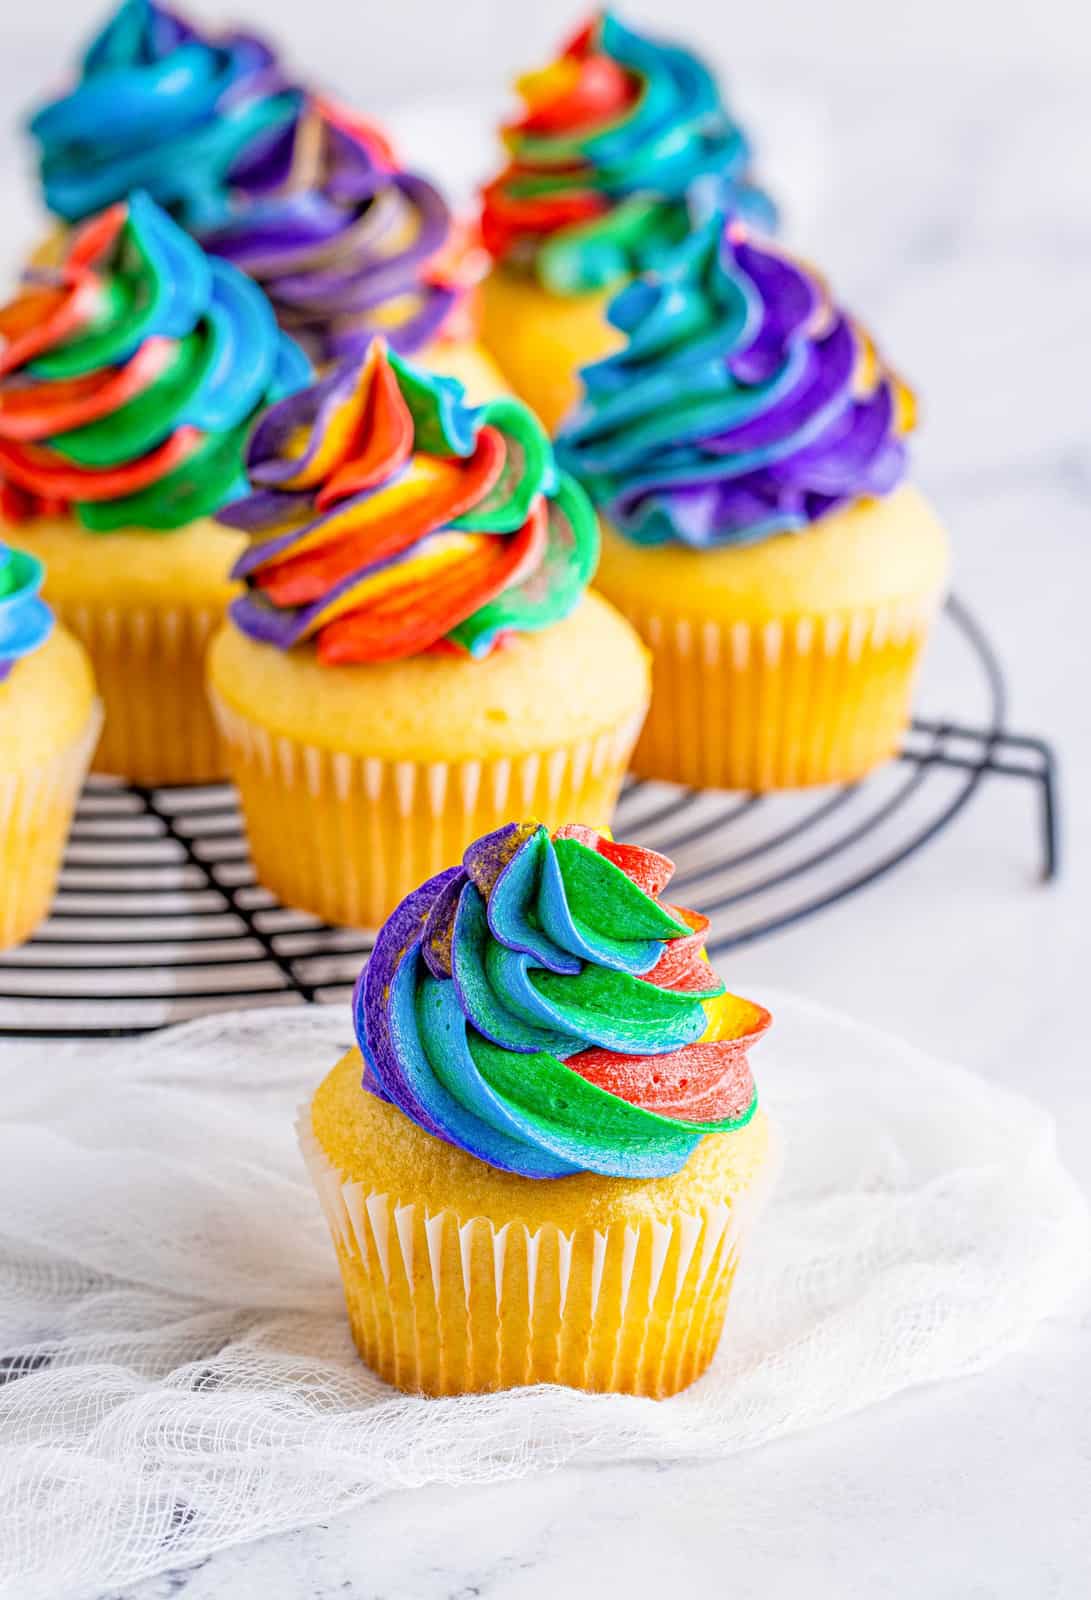 One cupcake frosted with Rainbow Frosting in front of wire rack.